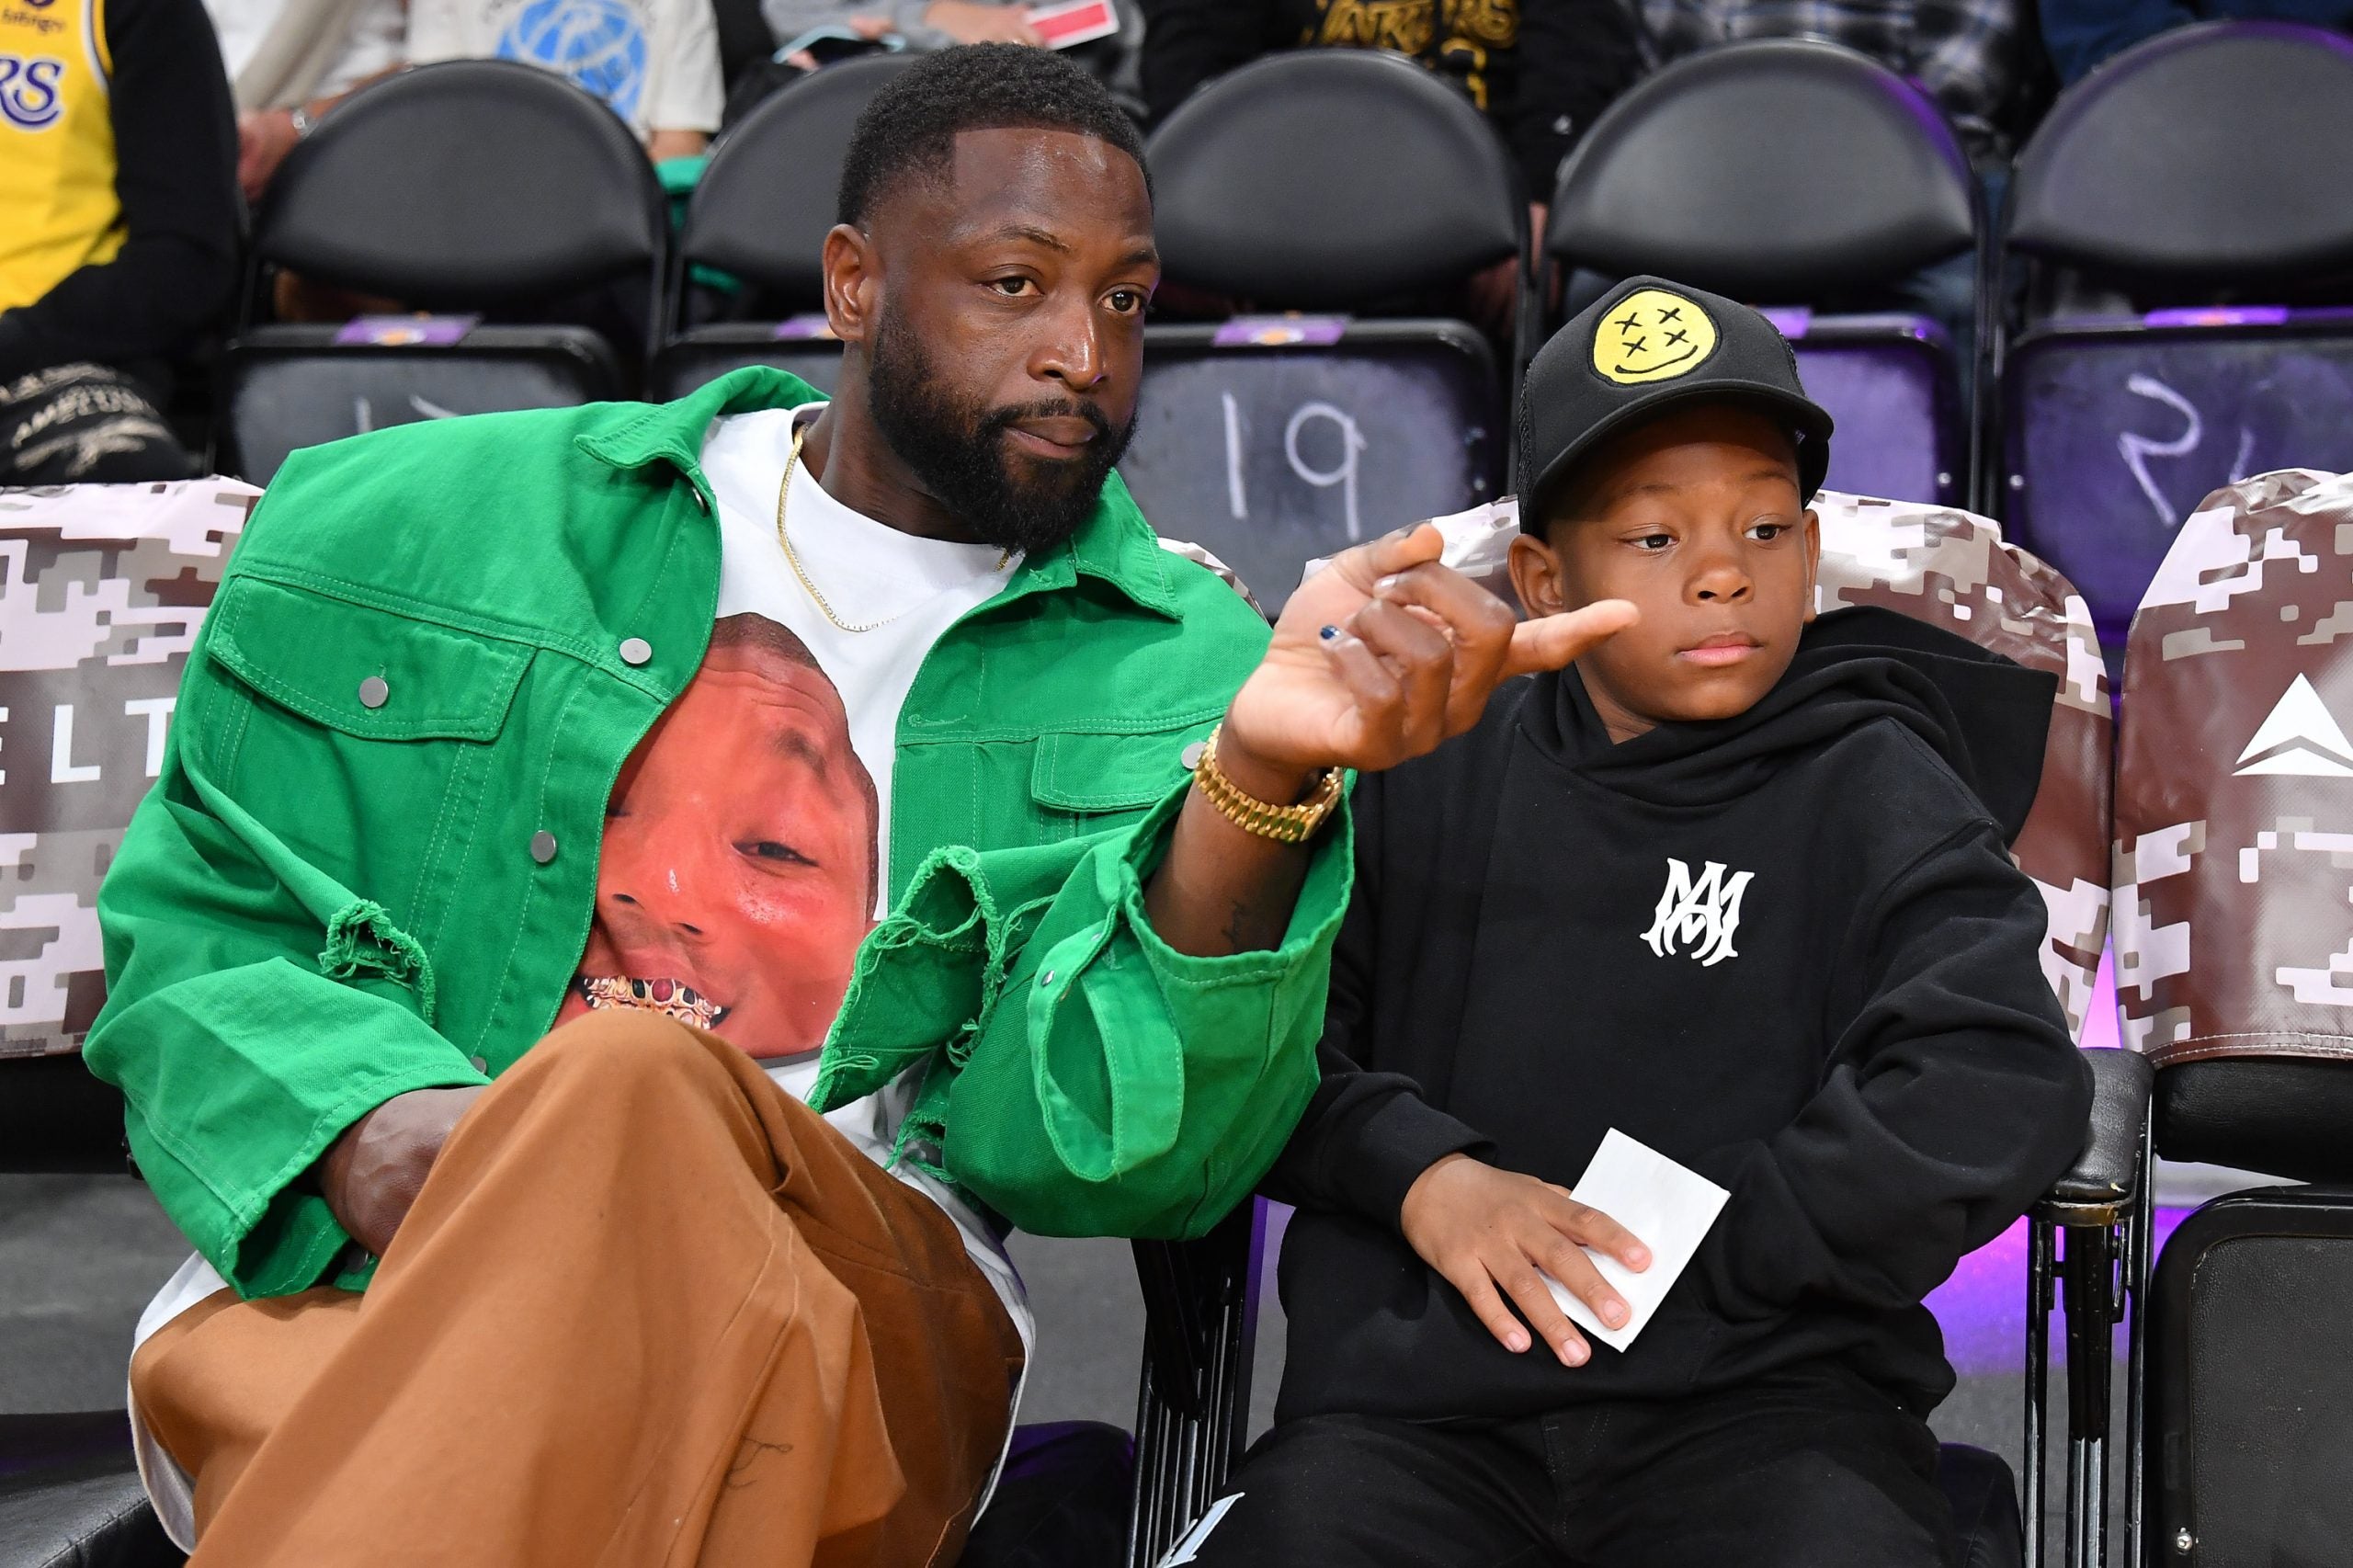 Dwayne Wade Steps Out With His Youngest Son Xavier For A Lakers Game